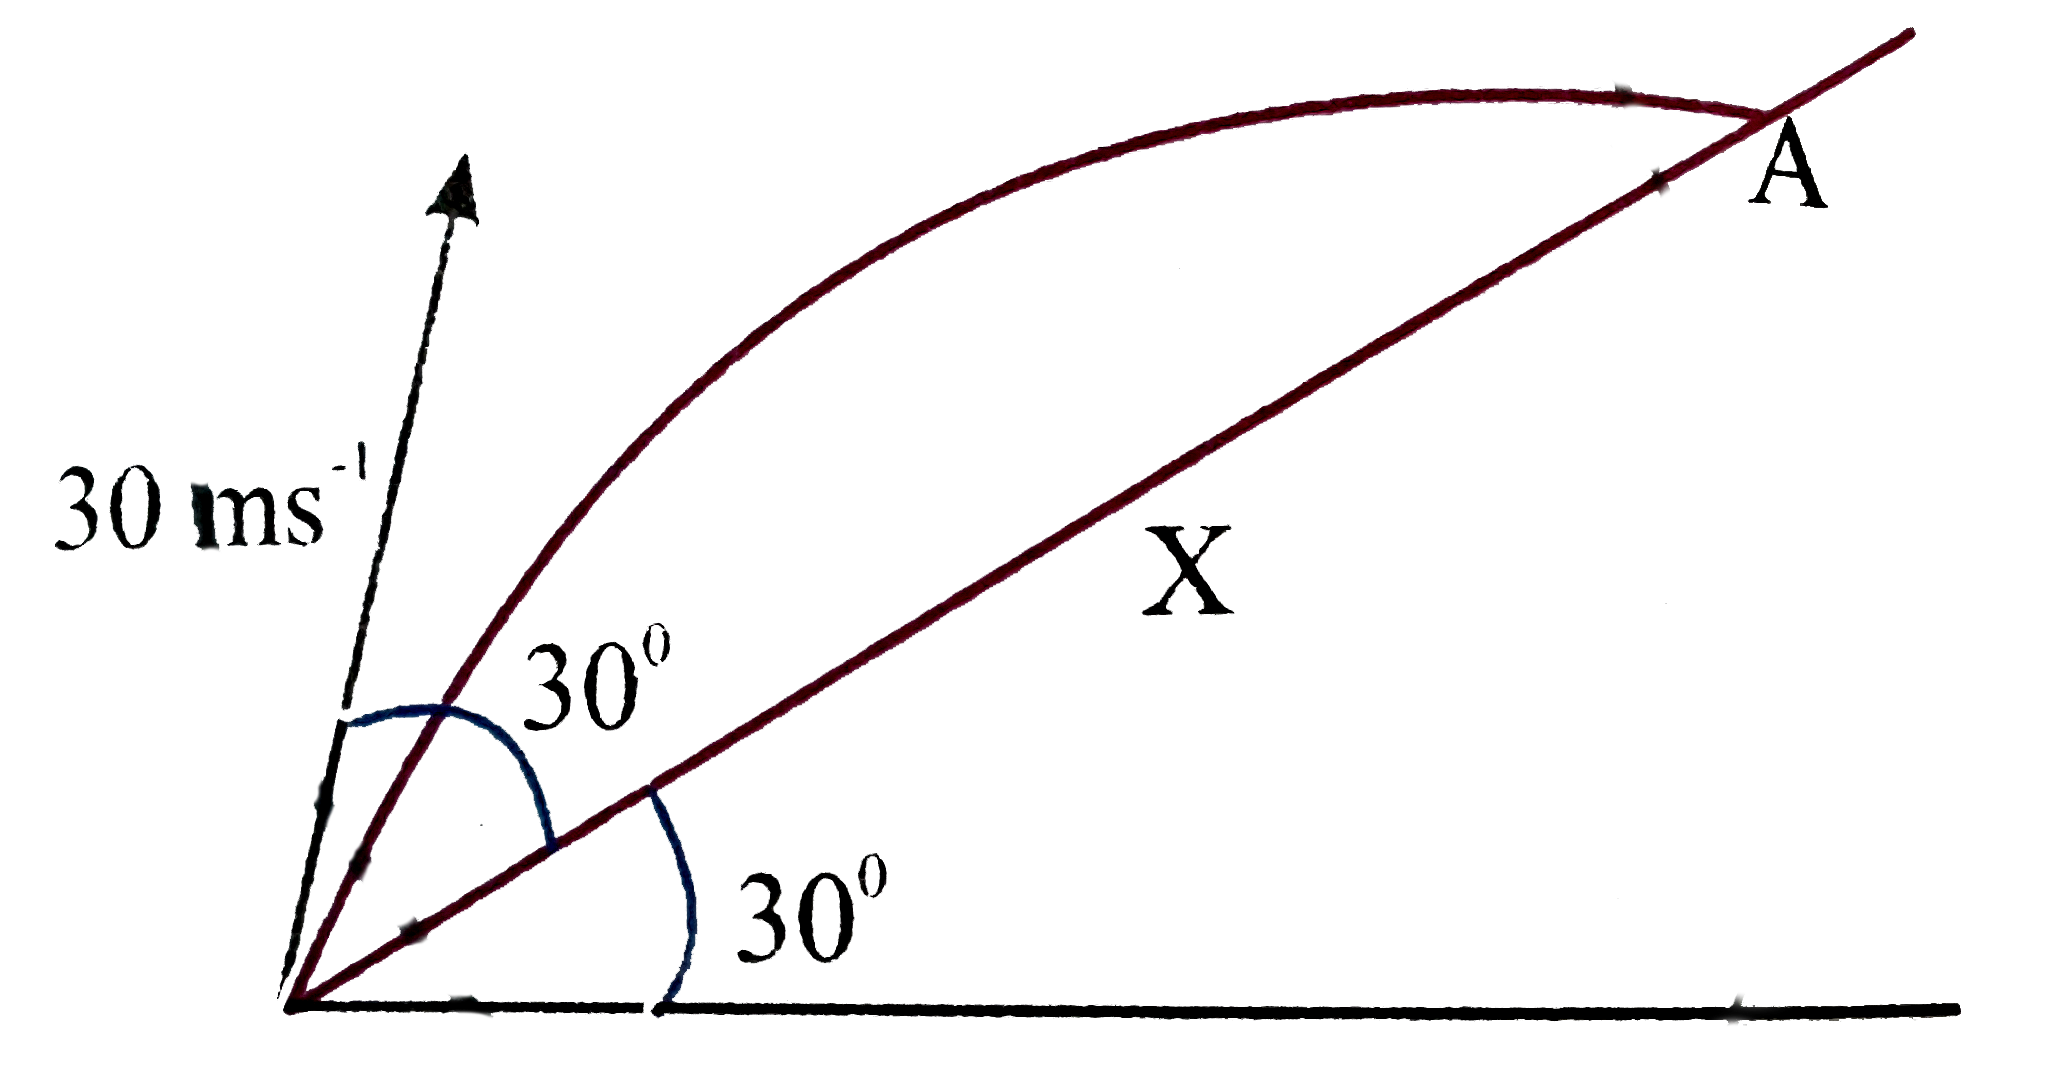 An object in projected up the inclined at the angle shown in the figure with an initial velocity of 30ms^(-1).The distance x up the incline at with the object lands is